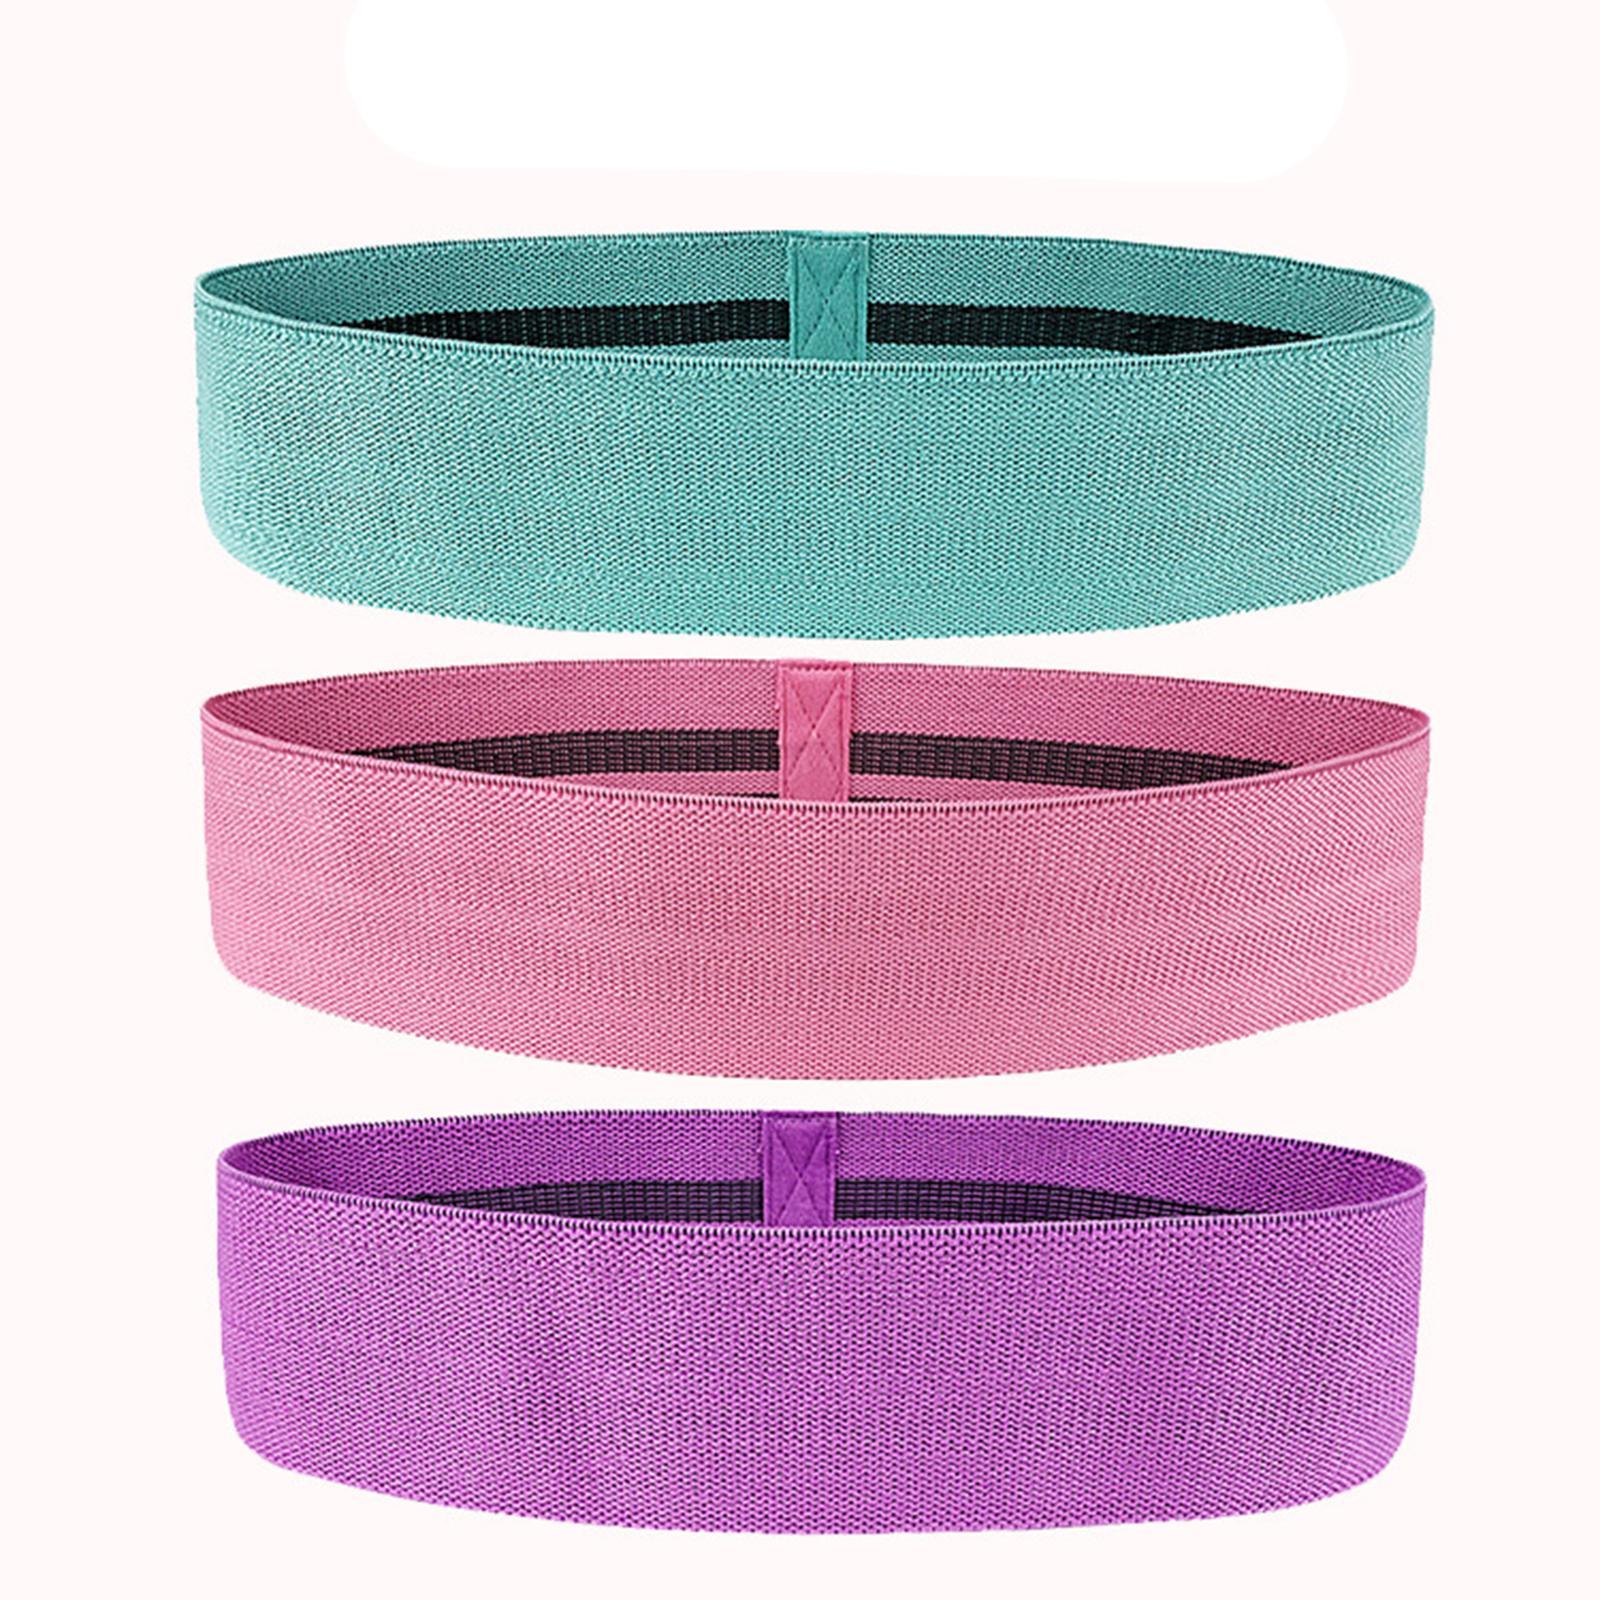 Portable Elastic Resistance Band Workout Non Slip for Booty Glutes